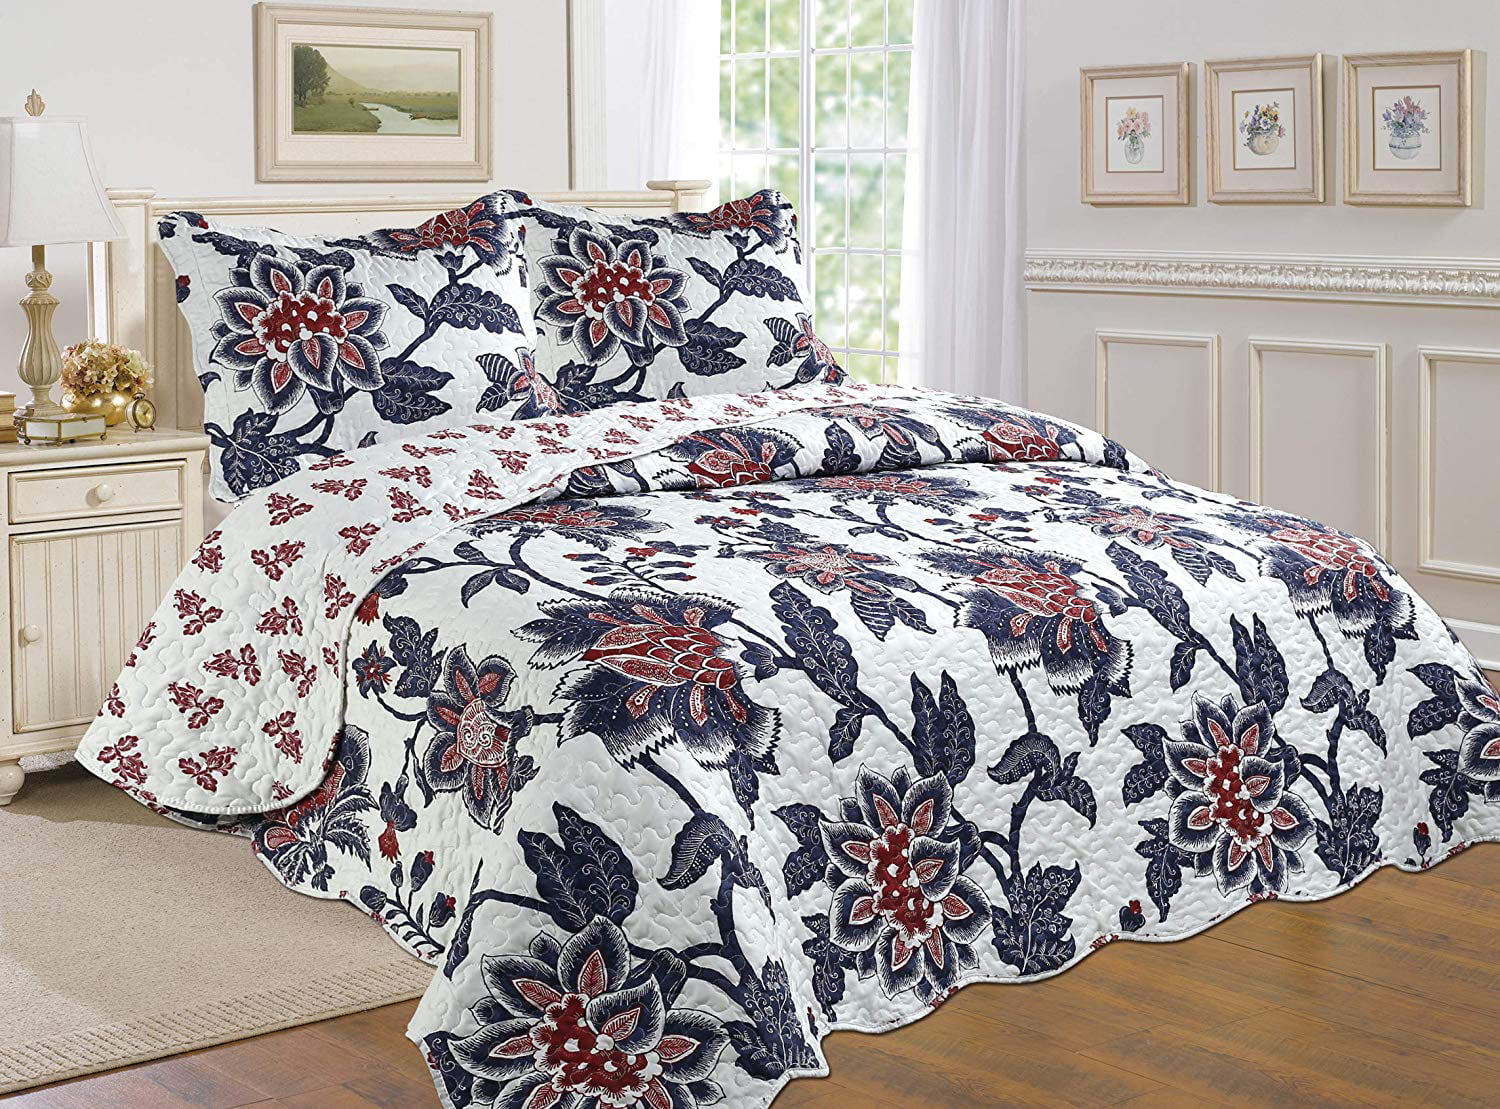 Details about   Mk Collection 3pc King/California King Solid Embossed Bedspread Bed Cover Over S 